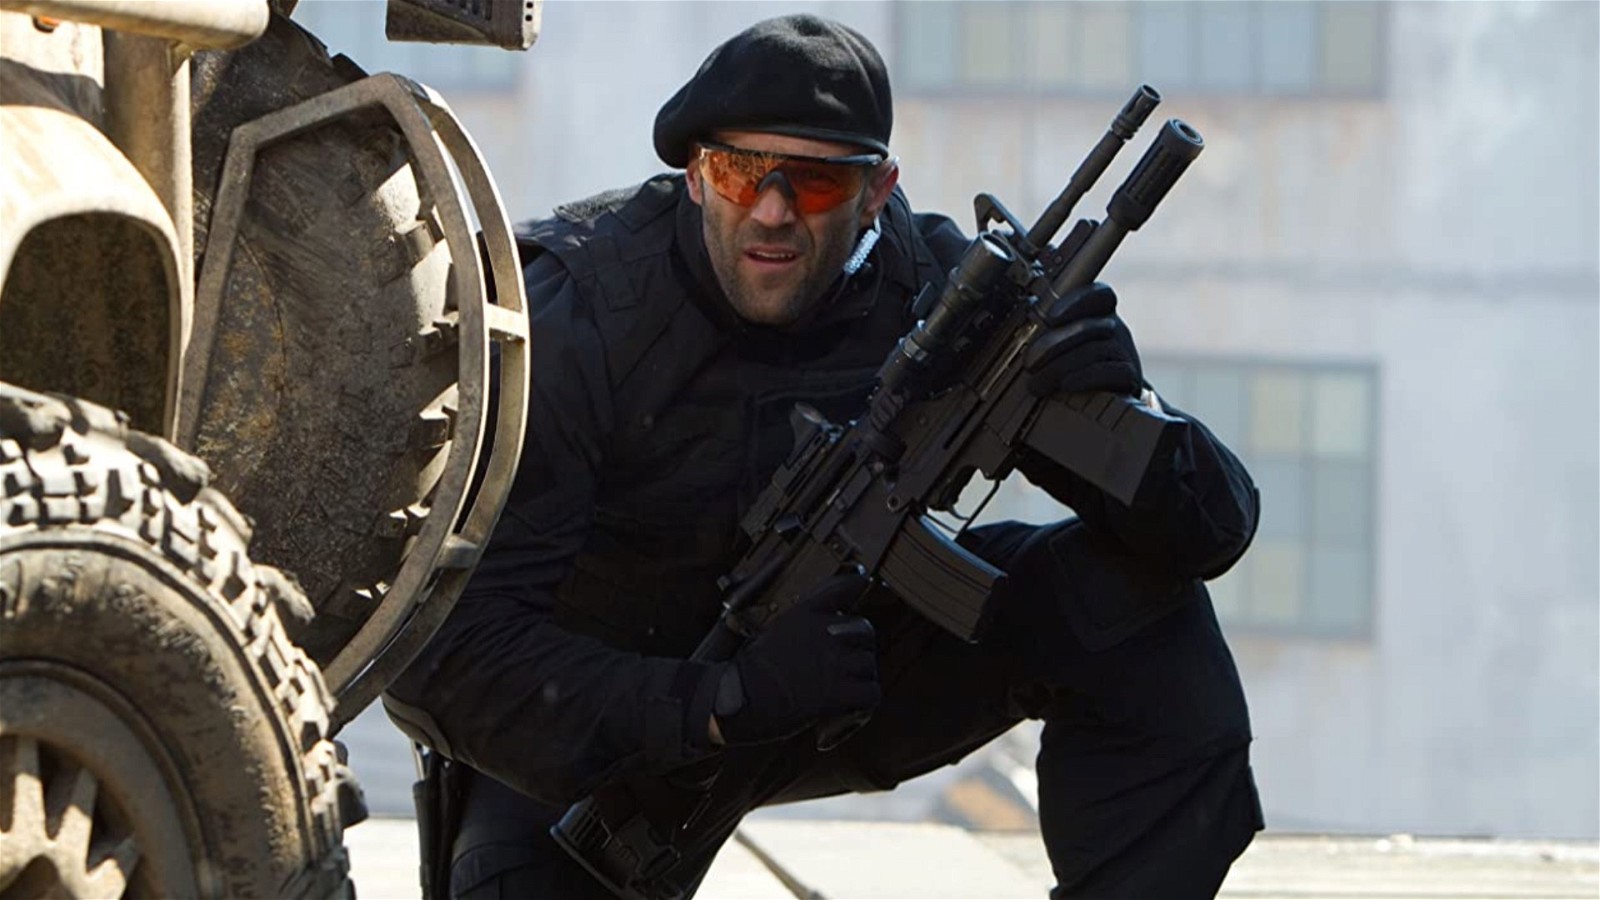 What he says he's entitled to say in his own way”: Jason Statham Believed ' Hobbs 